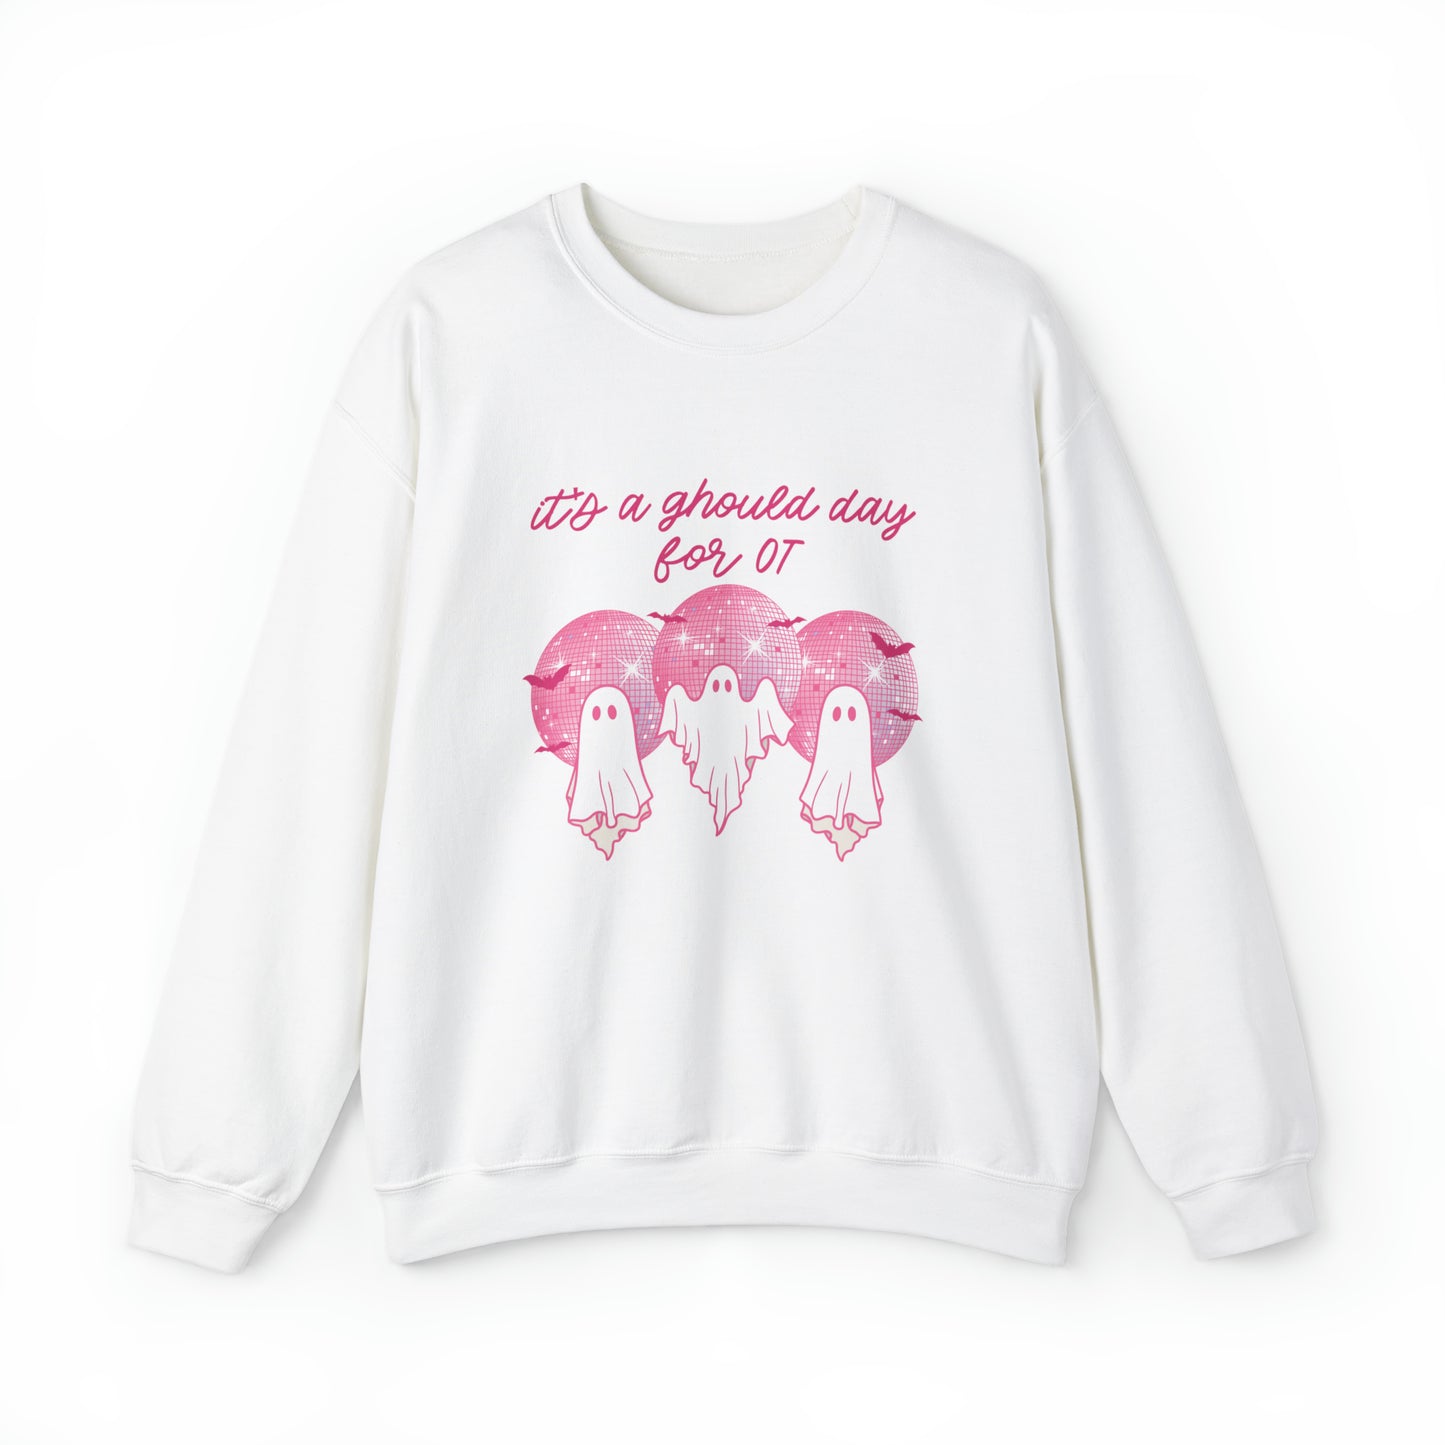 It's a Ghould Day for OT Crewneck Sweatshirt